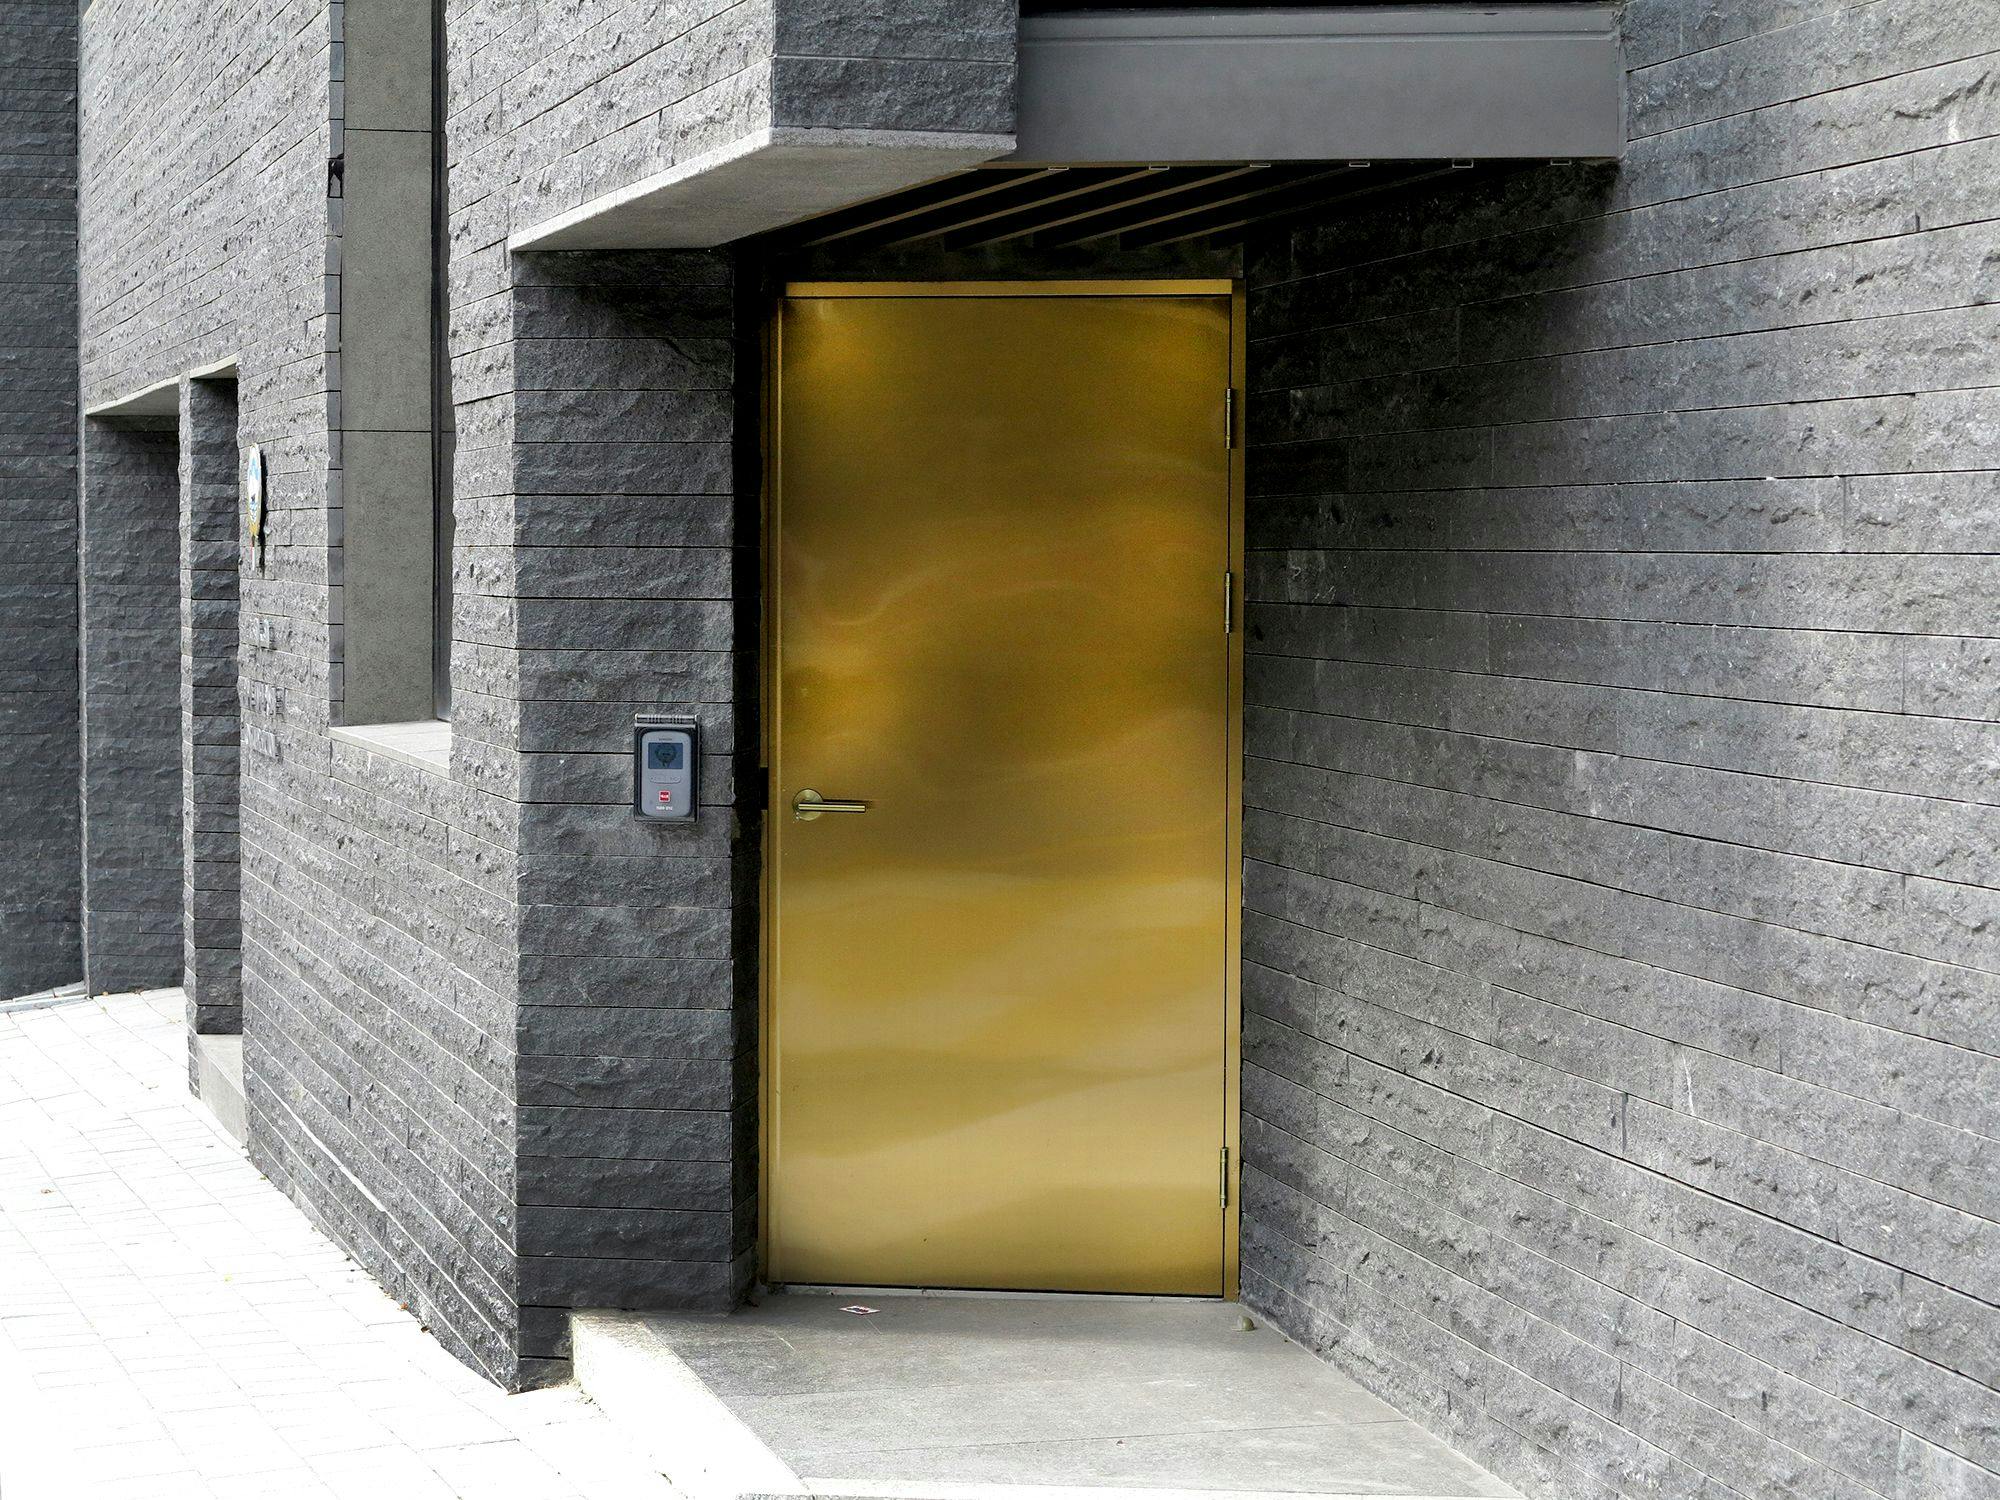 A gold door with a minimal handle on the exterior of a gray building made of dark stone brick. To the left of the door is a mounted security keypad.